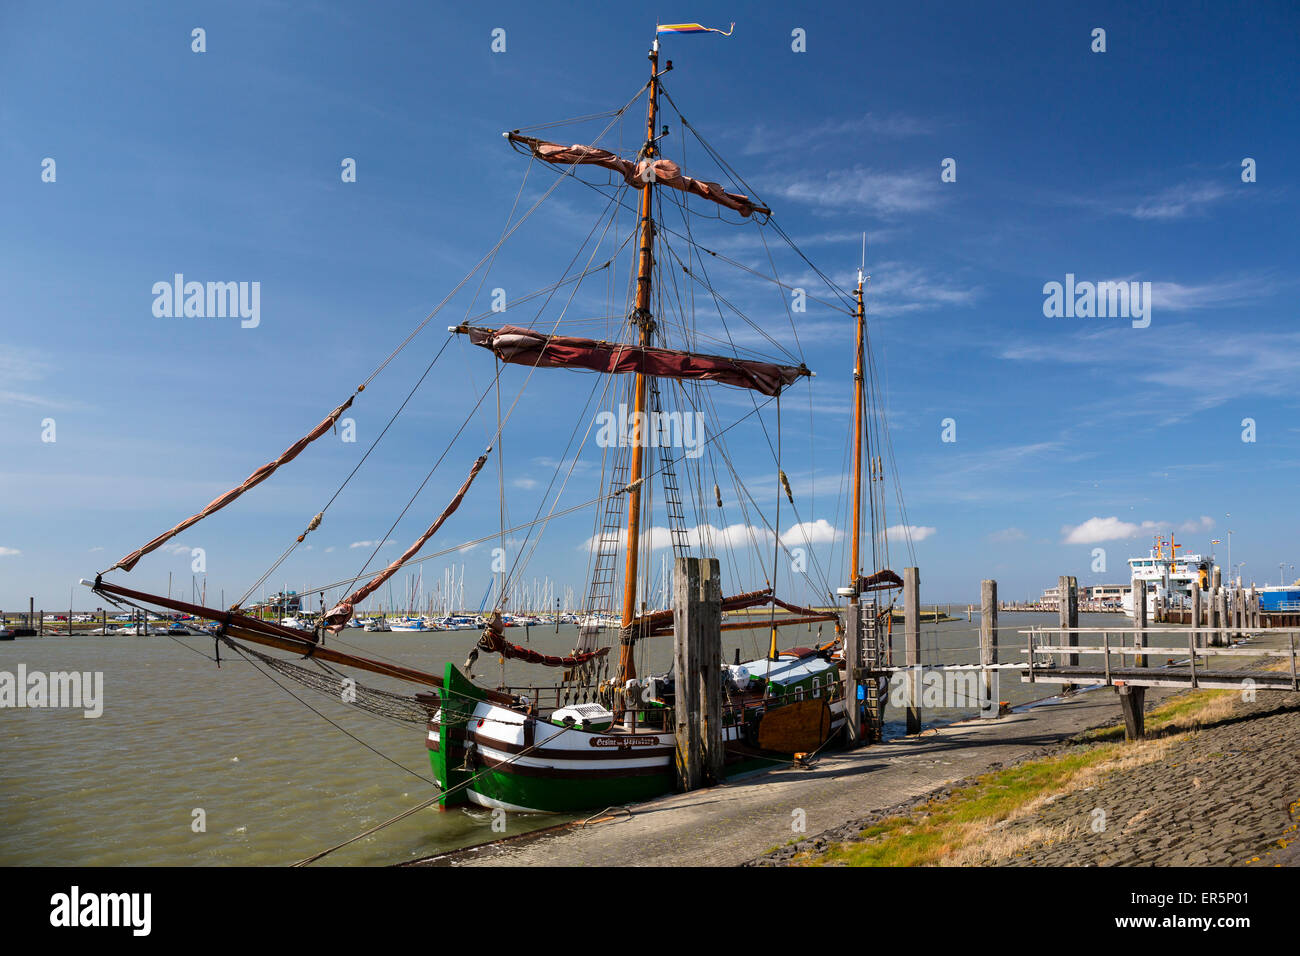 Old sailing boat in Norddeich harbour, Norden, Nationalpark, North Sea, East Frisian Islands, East Frisia, Lower Saxony, Germany Stock Photo